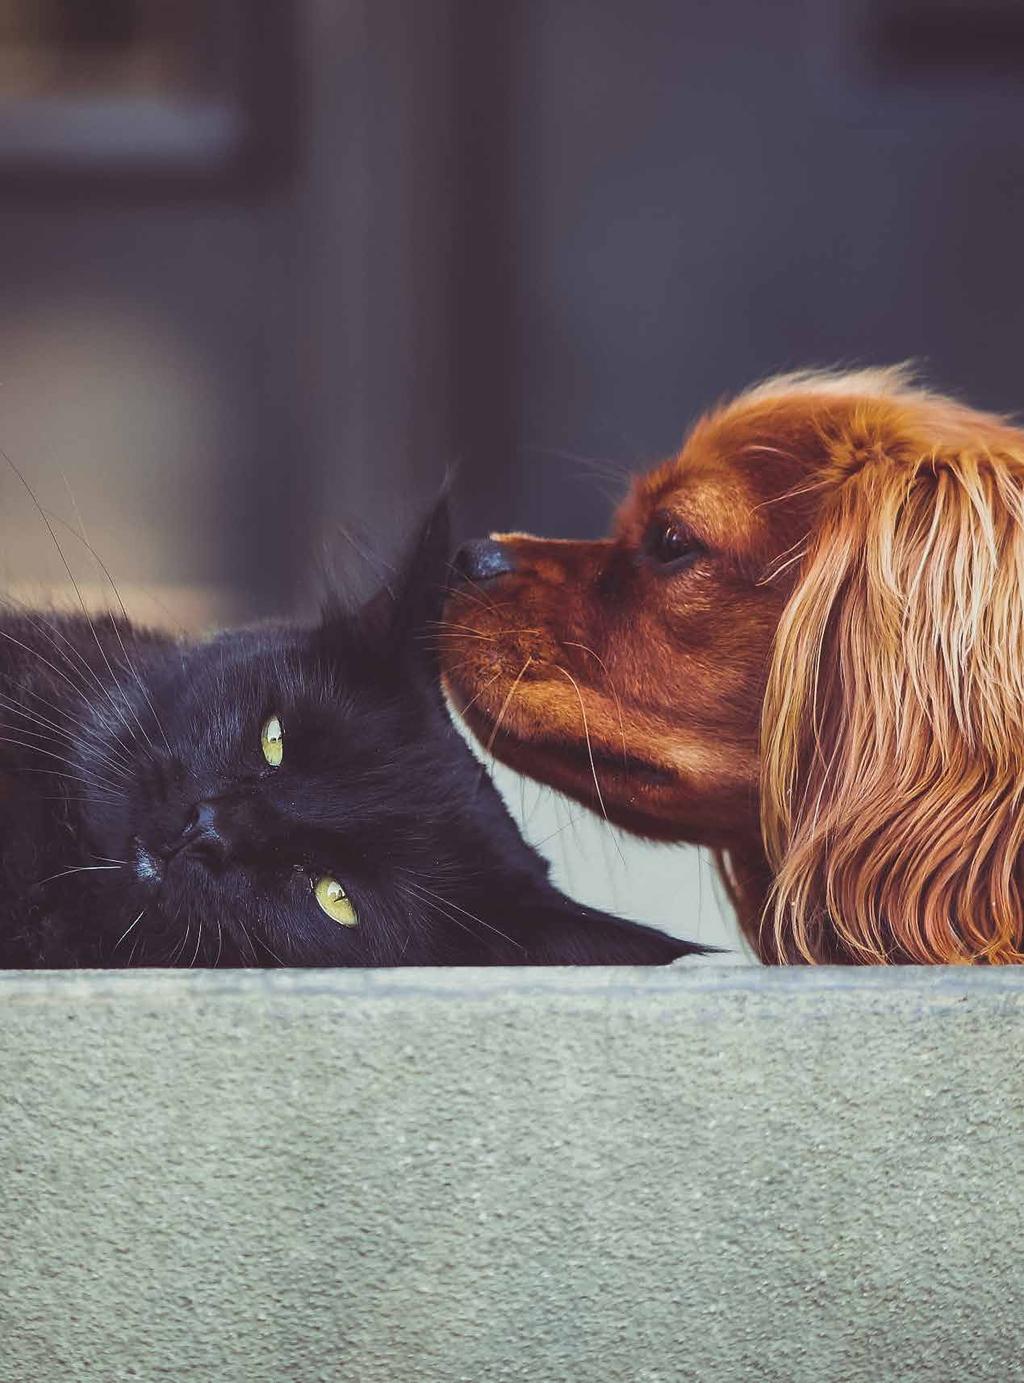 How to Introduce a Cat to a Dog W hen cat meets dog, you want tails wagging, not tales of woe. The good news is cat-todog introductions tend to be less adversarial than cat-to-cat meetings.